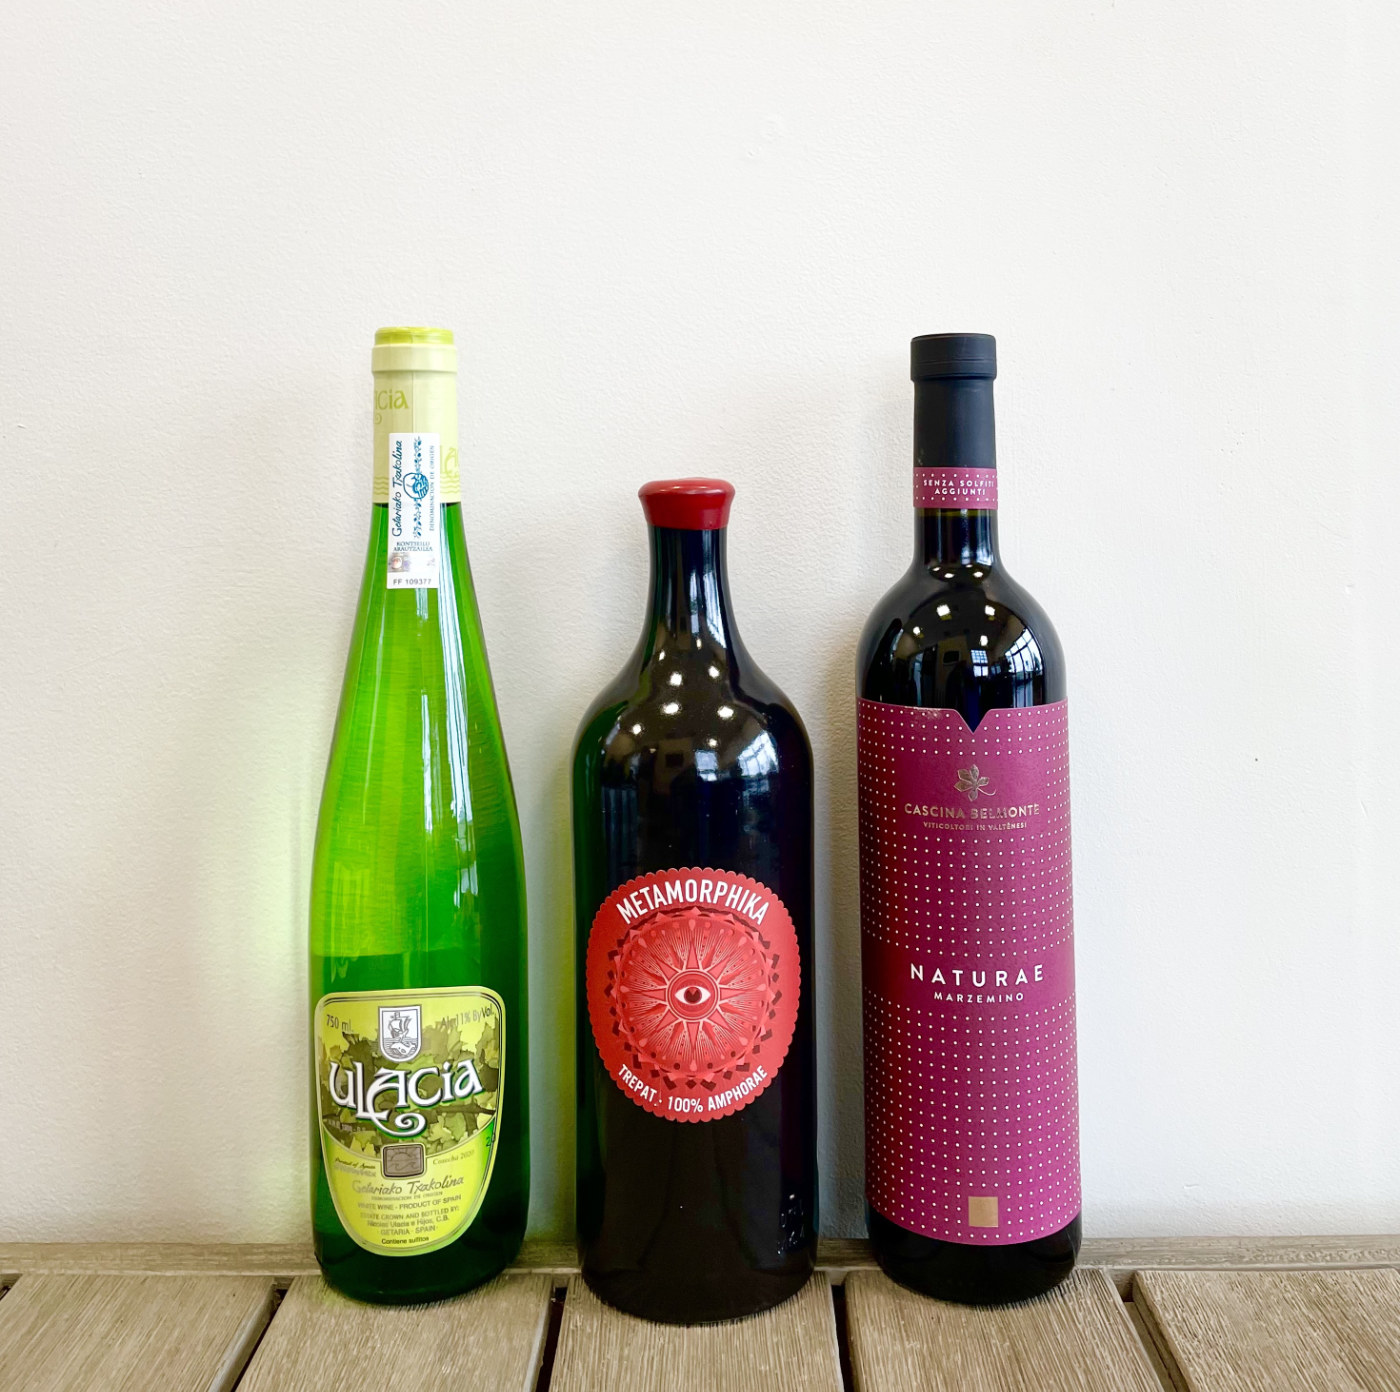 Preview of sample club wines